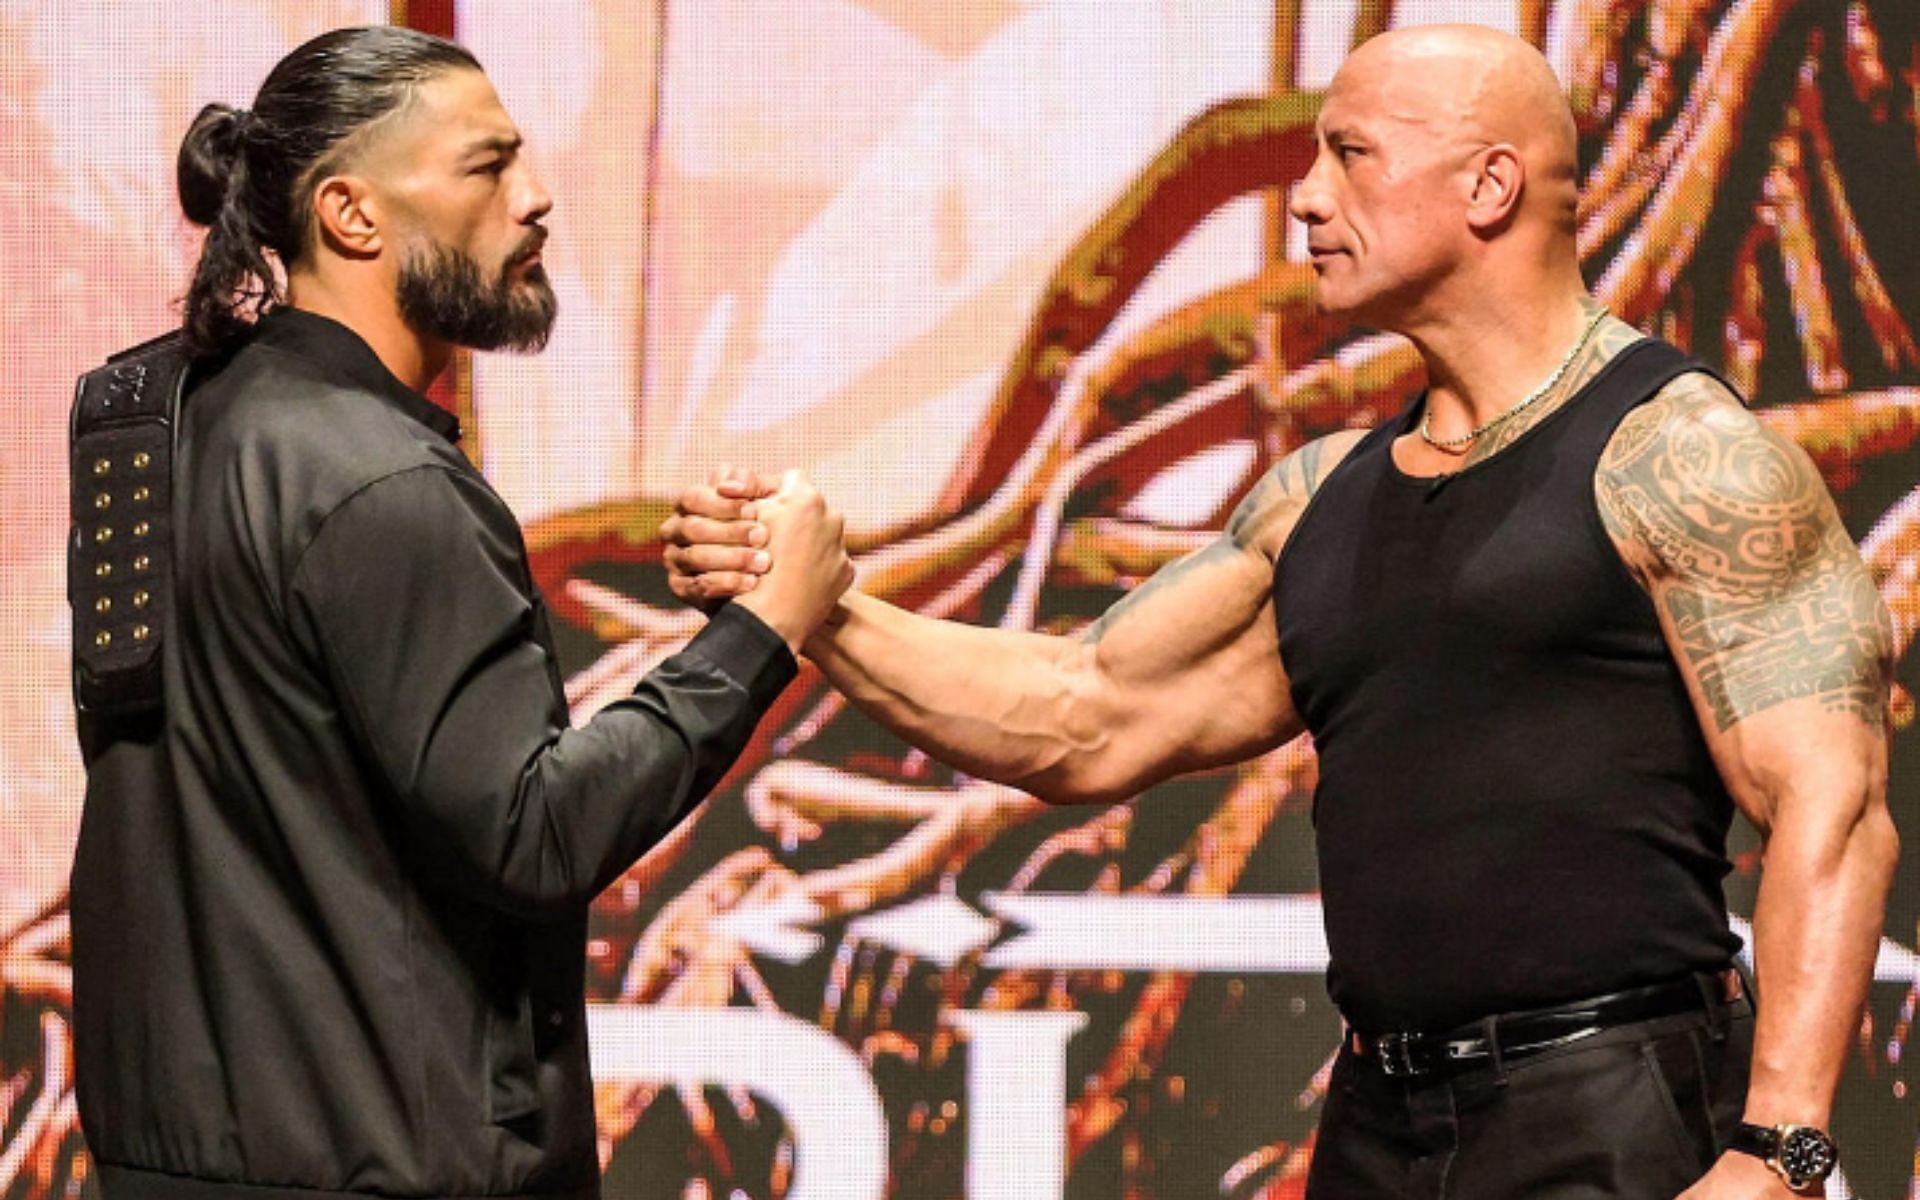 Roman Reigns and The Rock have teamed up together as a dominant heel duo  (Image source: WWE)